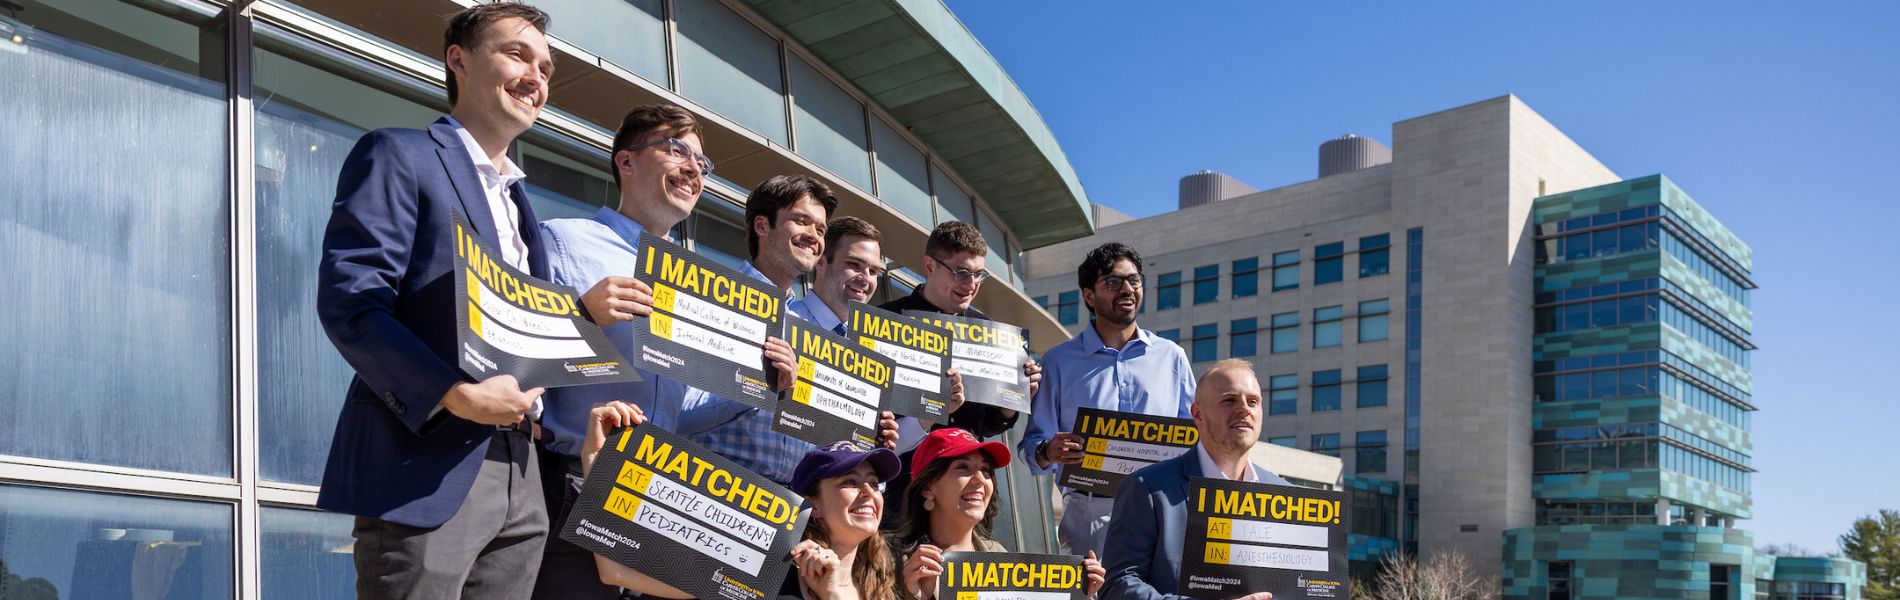 A group of medical students pose on campus with their "I Matched" signs